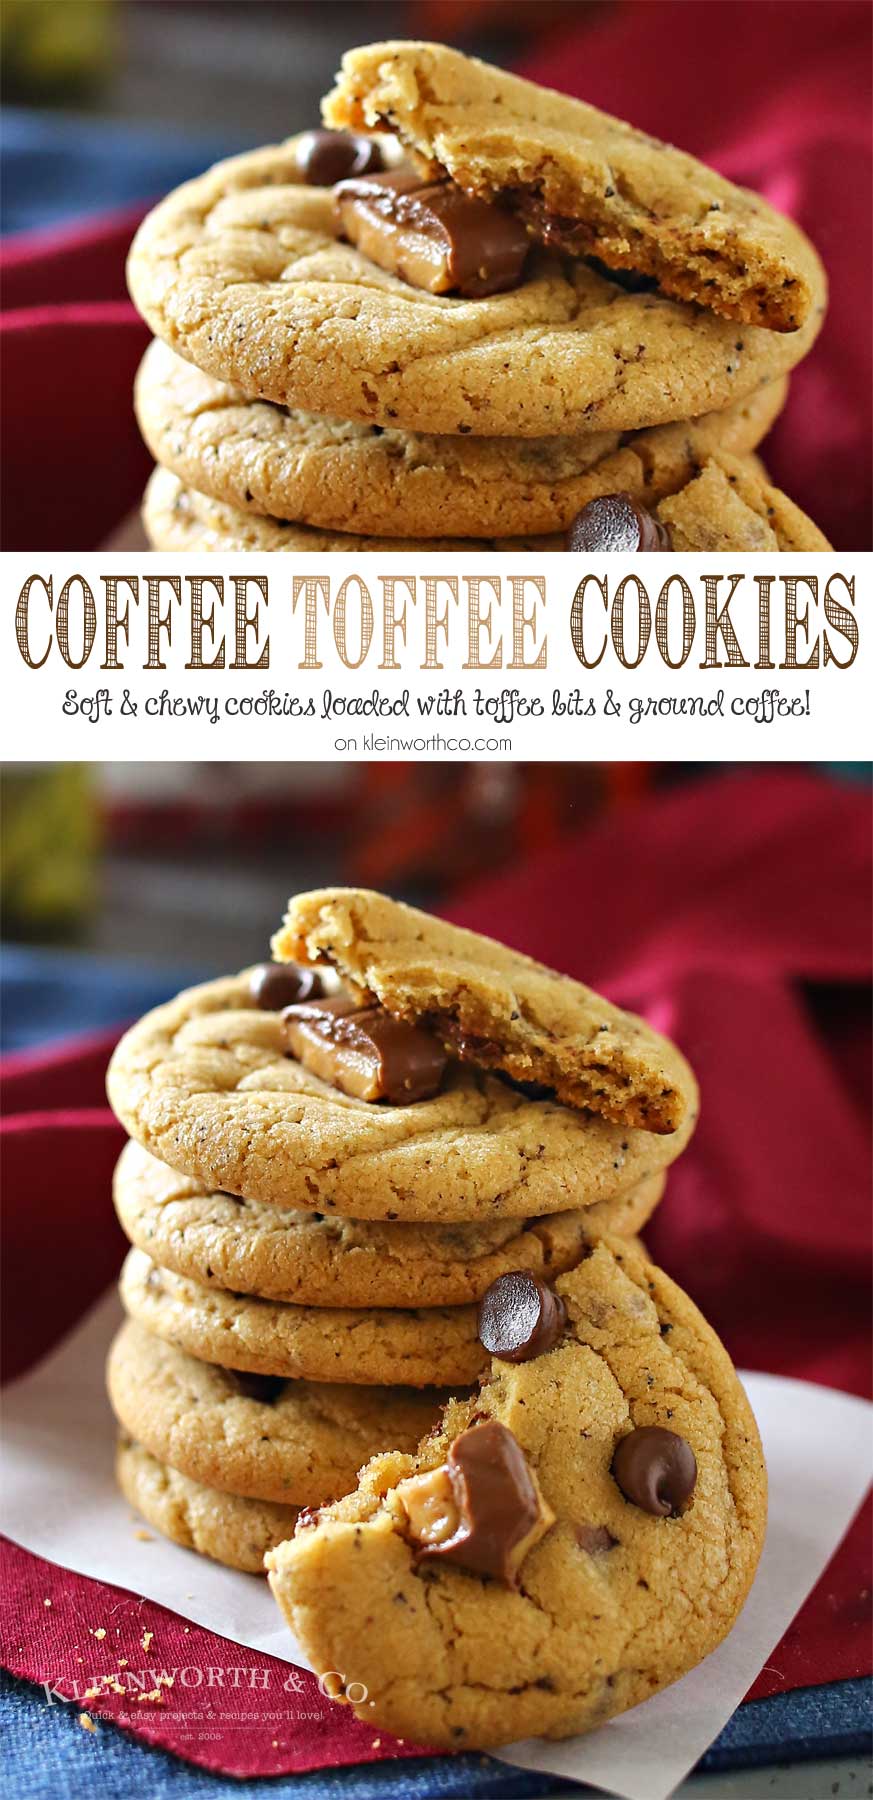 Coffee Toffee Cookies, a soft & chewy cookie loaded with chocolate chips, toffee bits & COFFEE. A java lovers dream, definitely the perfect coffee pairing. You won't be able to eat just one. Plus my new favorite coffee flavor obsession.